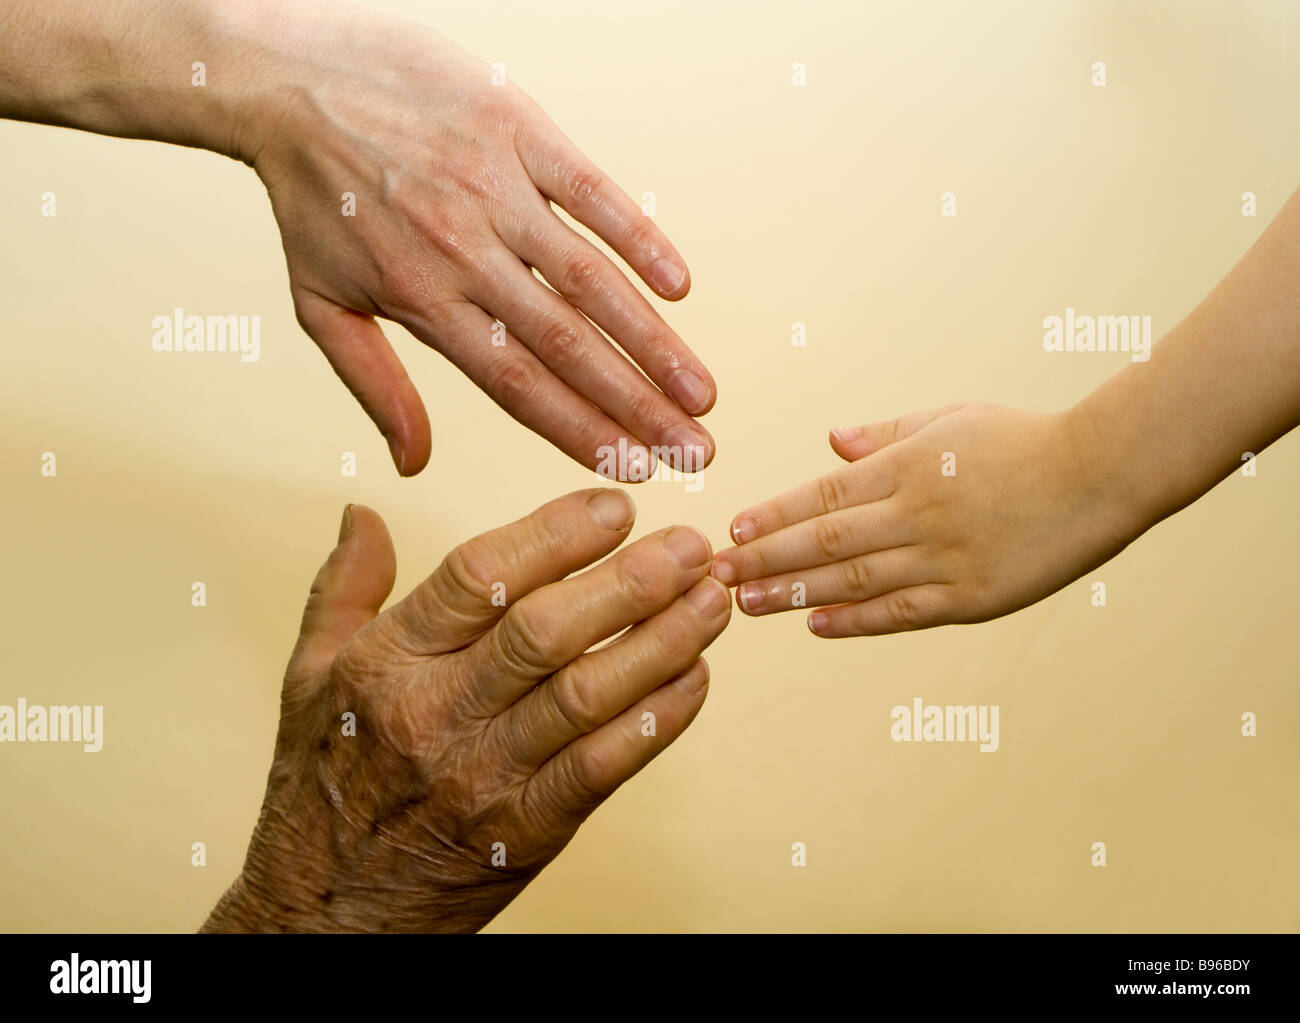 hands of generation Stock Photo